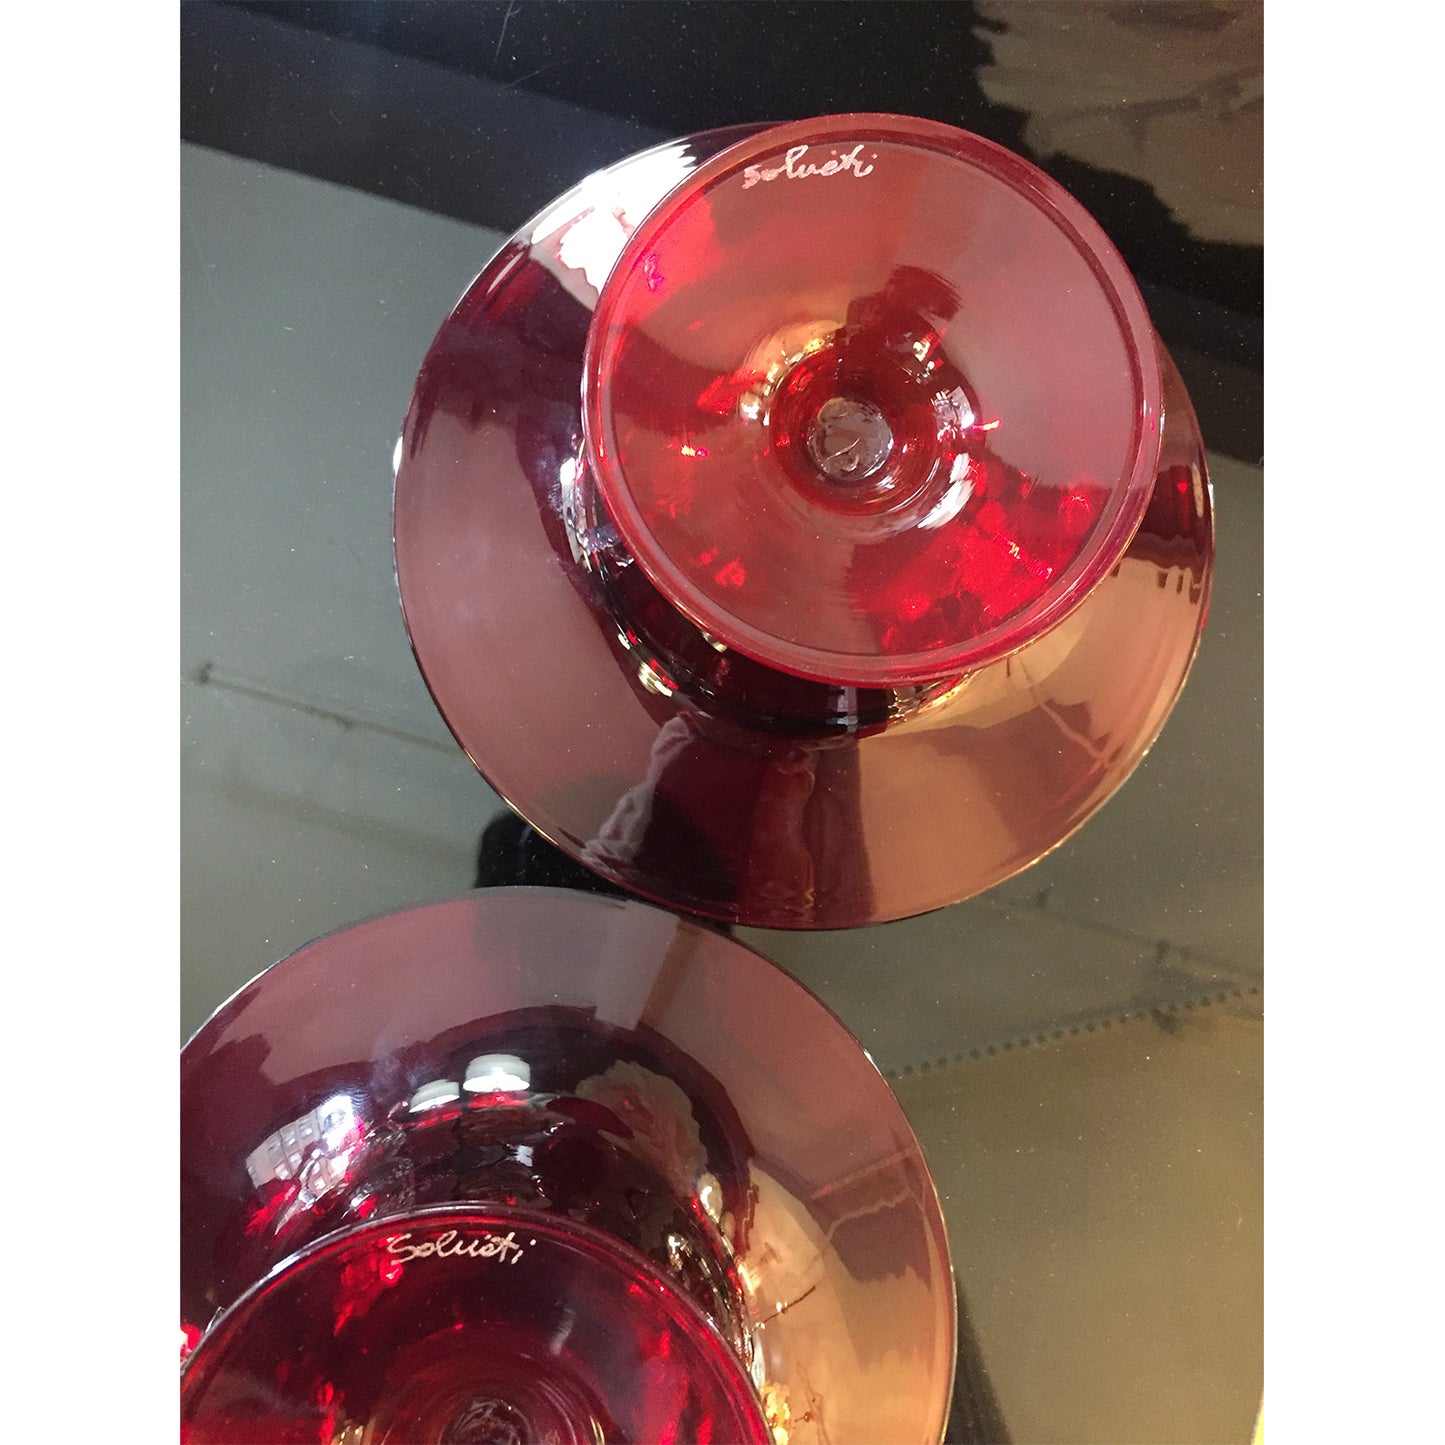 Salviati 1940s Italian Pair of Antique Ruby Red Blown Murano Glass Compote Bowls